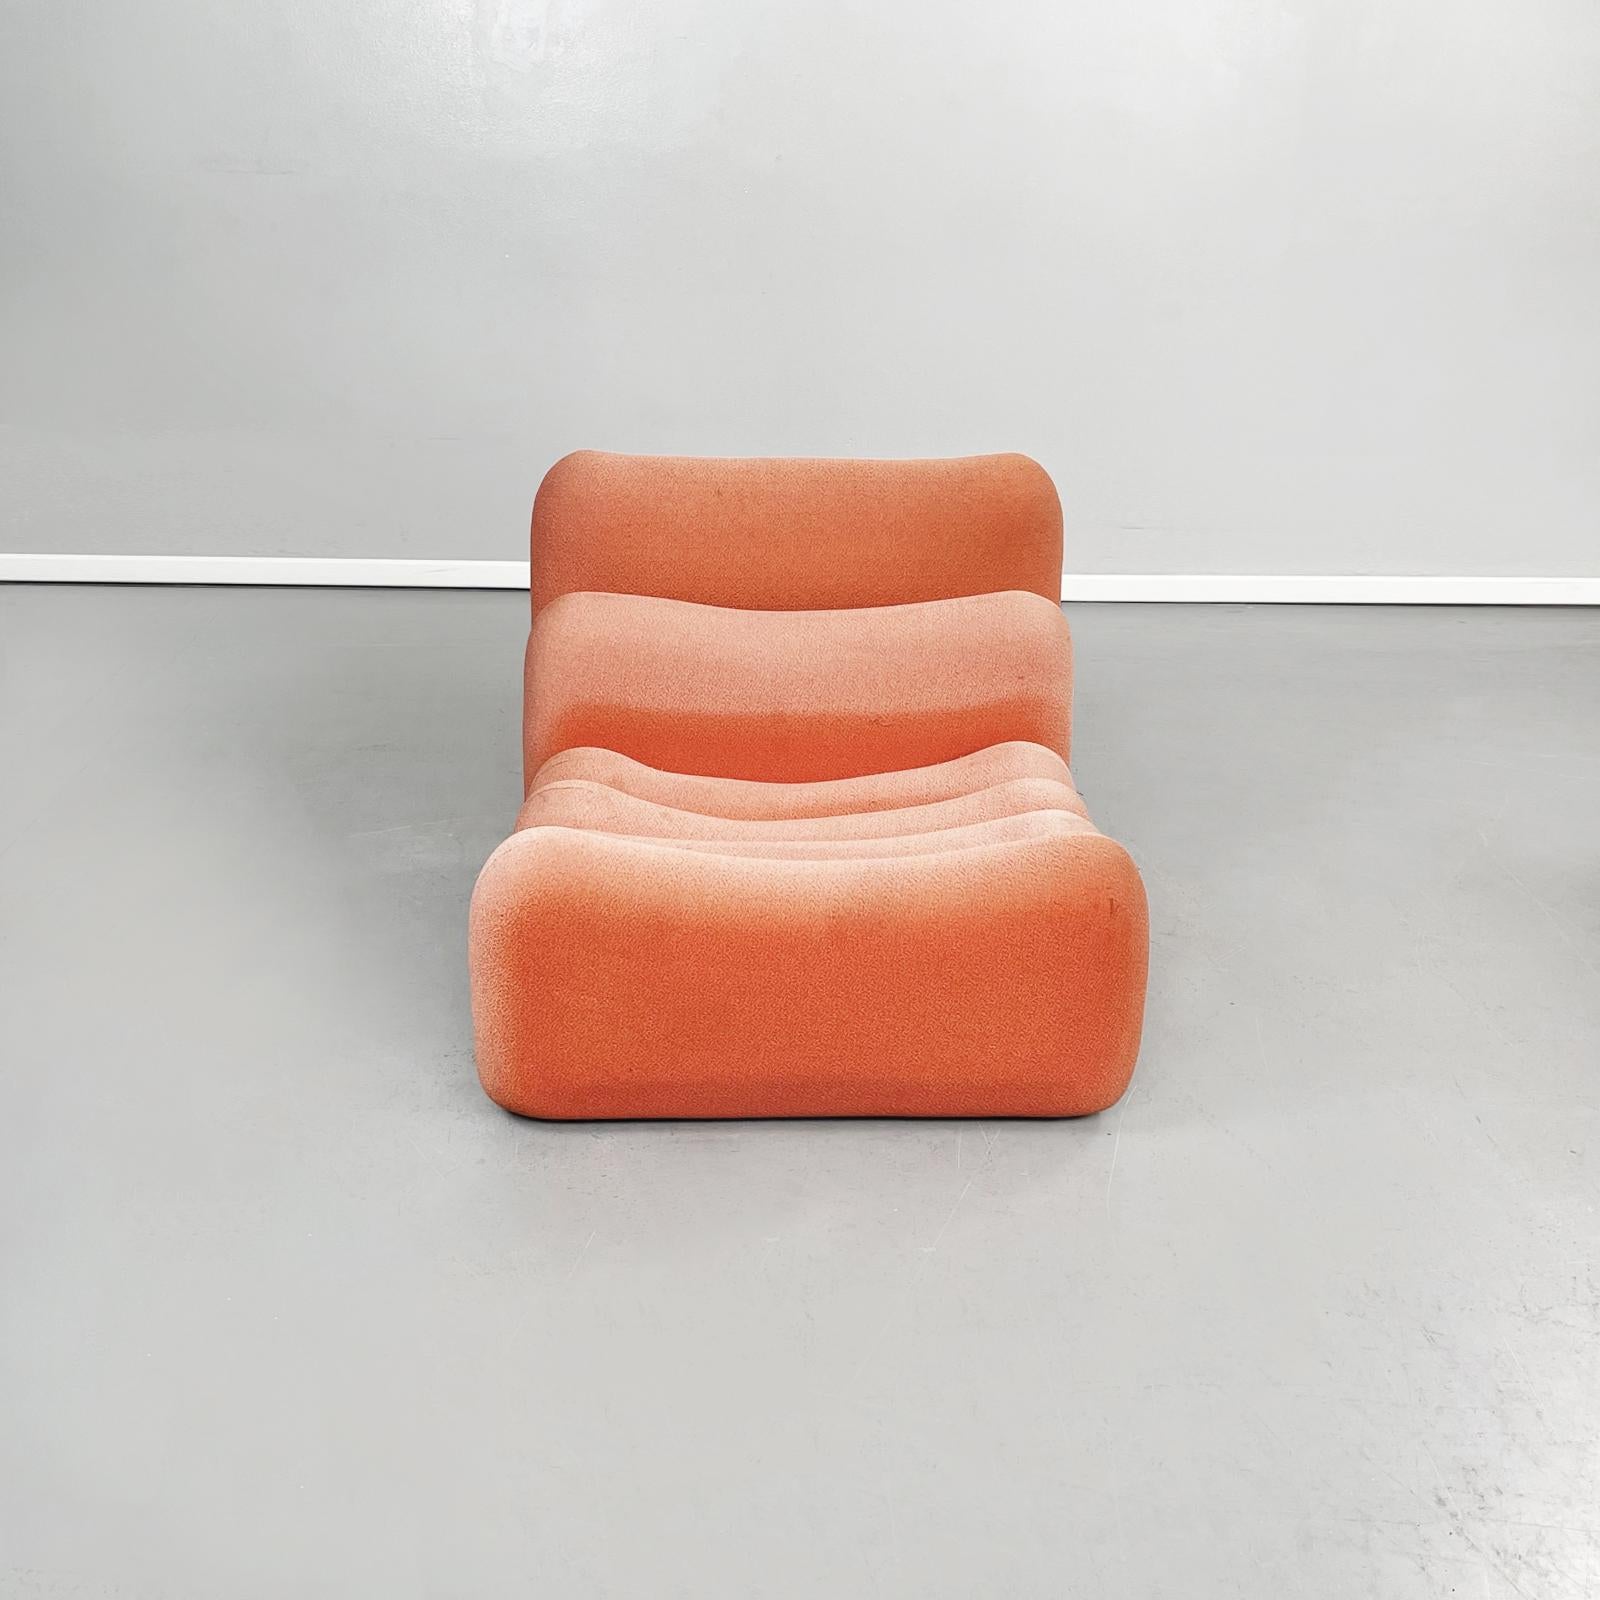 Late 20th Century Italian Space Age Fabric Aluminum Armchairs by Joe Colombo for Sormani, 1970s For Sale